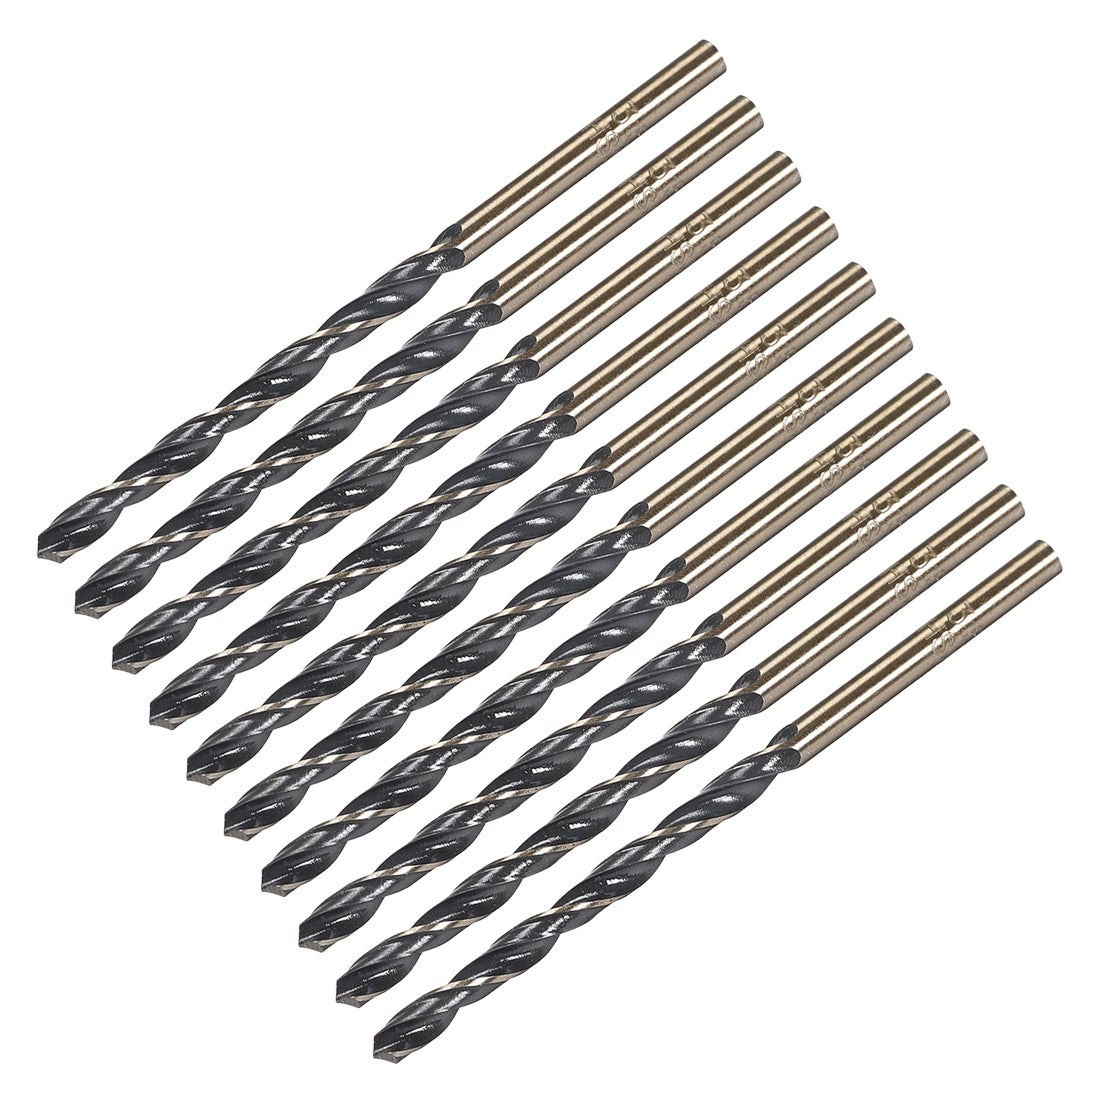 uxcell Uxcell Straight Shank Twist Drill Bits 3.5mm HSS 4341 with 3.5mm Shank 10 Pcs